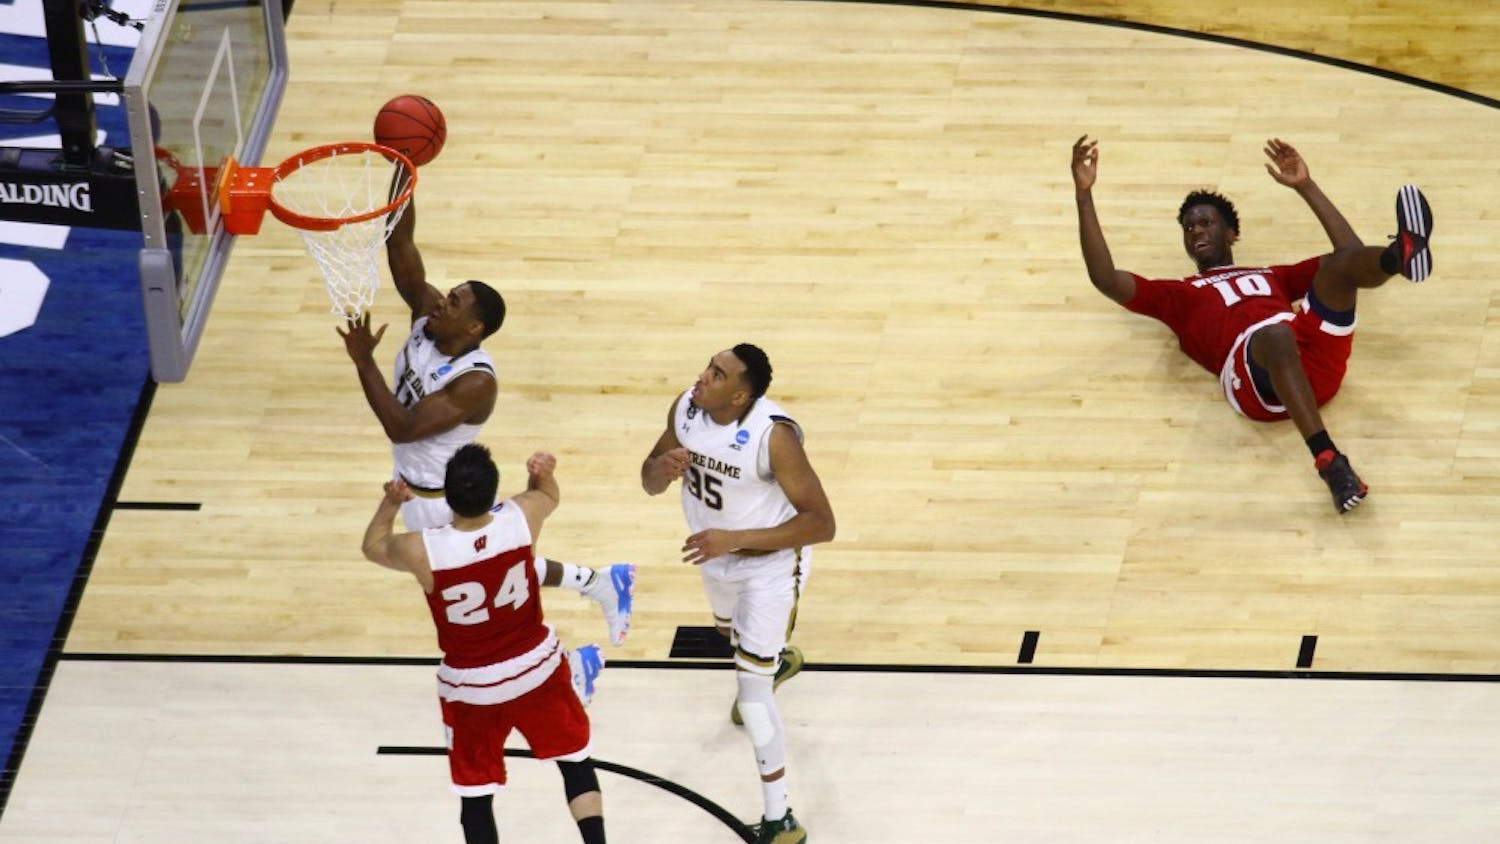 Demetrius Jackson shoos the ball and puts Notre Dame in the lead, 57-56 with seconds remaining.